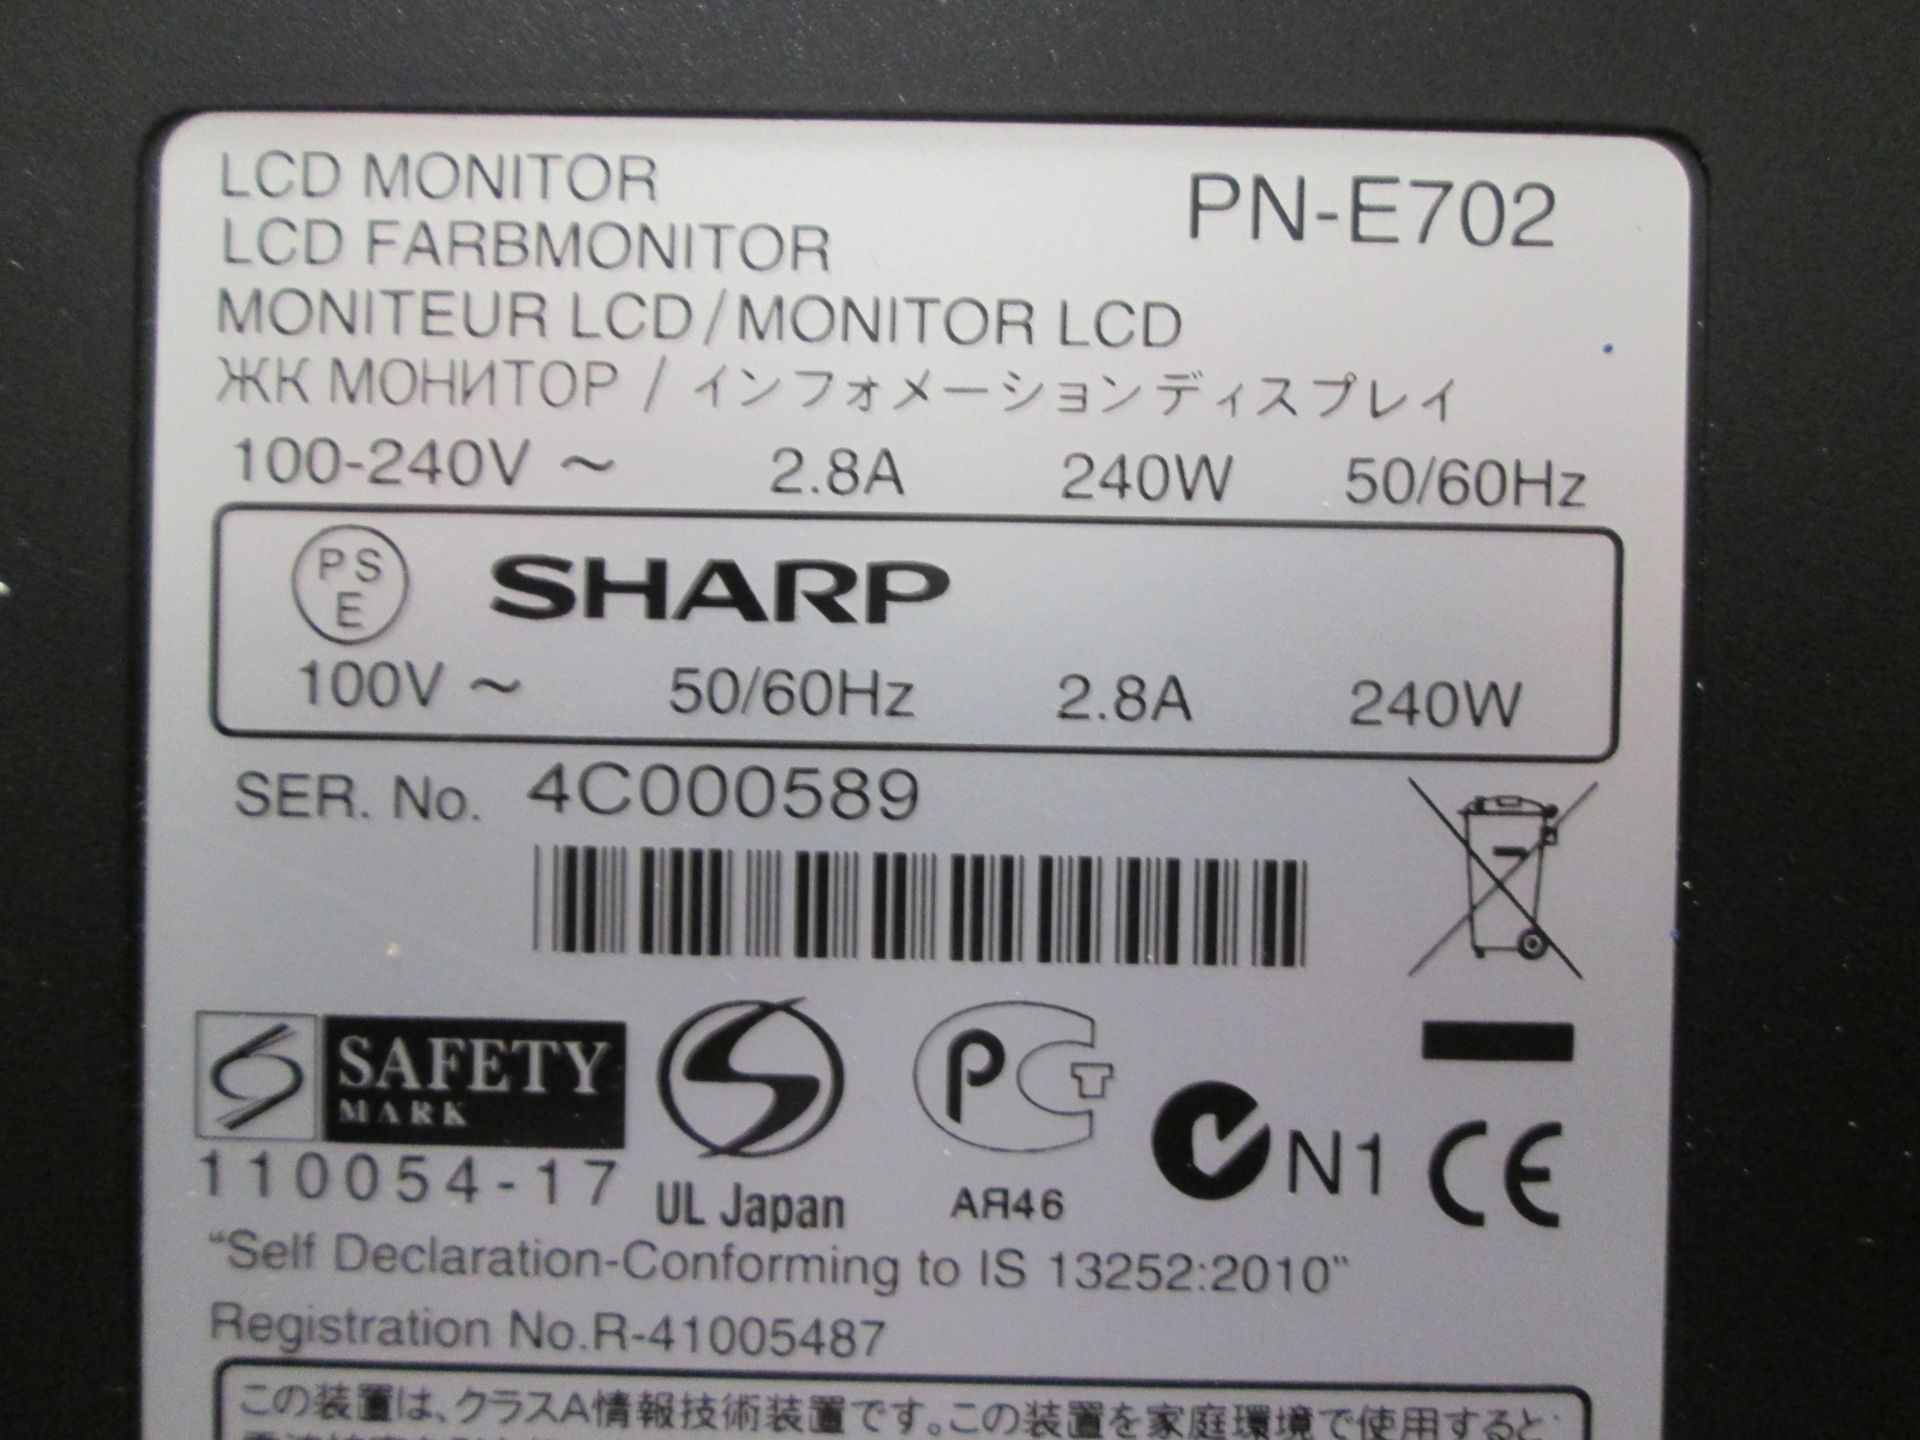 Sharp 70" LCD Colour Monitor, Model PN-E702, S/N 4C000589, In flight case with backplate and remote - Image 3 of 6